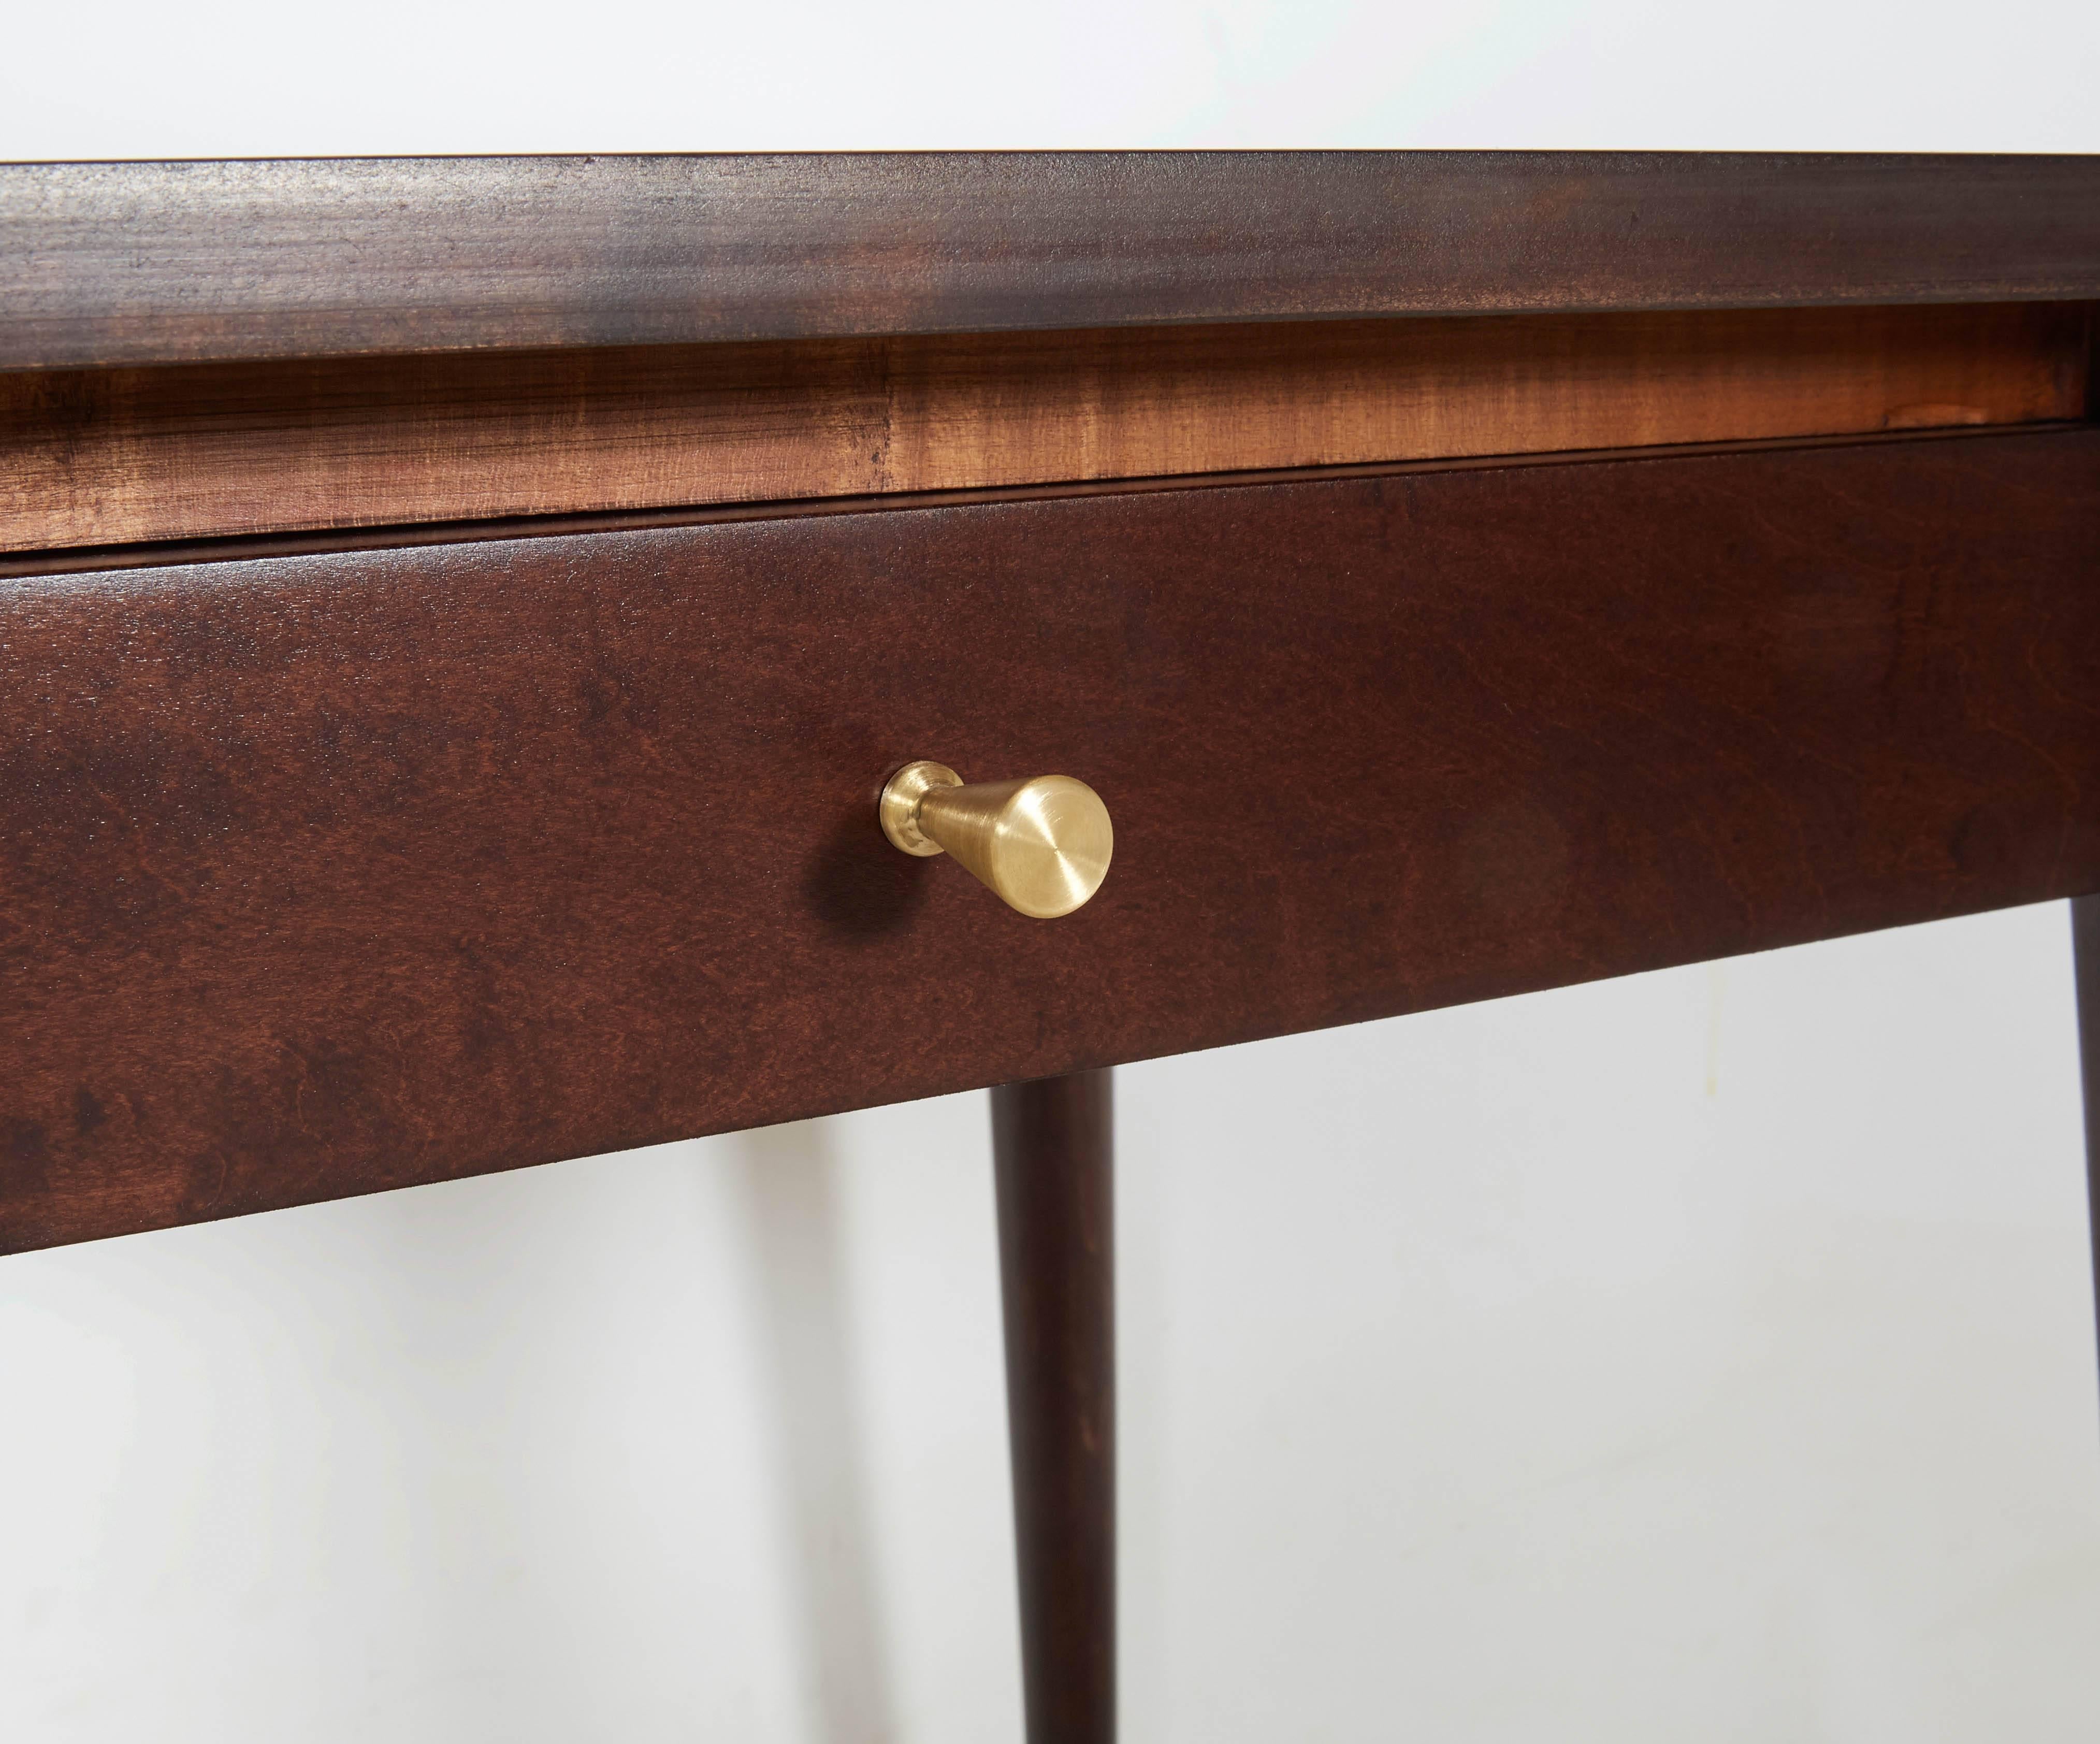 Classic Paul McCobb Planner Group nightstands or end tables beautifully restored in a rich dark stain and accented with McCobb's signature brass pulls. Please contact for location. Offered by Las Venus by Kenneth Clark, New York City.